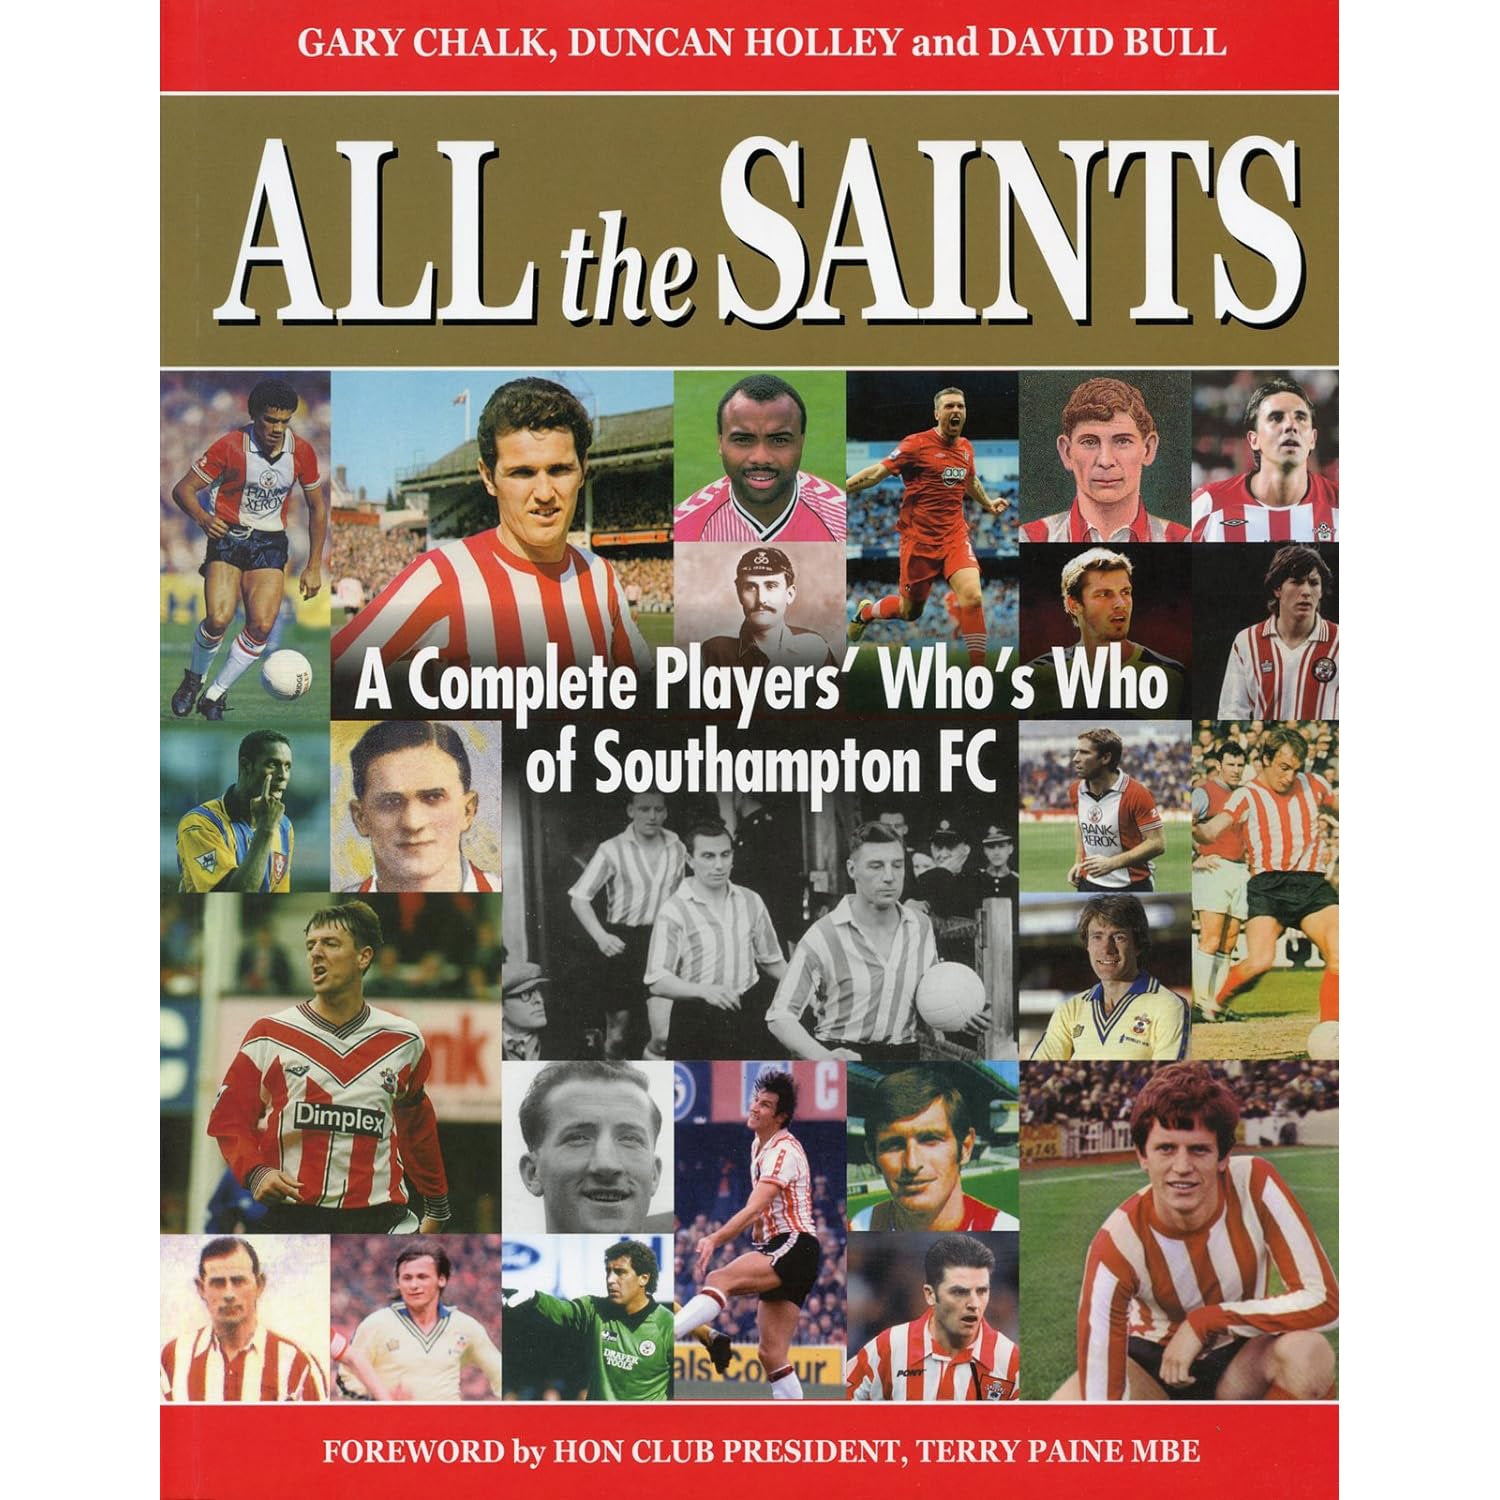 All the Saints – A Complete Players' Who's Who of Southampton FC